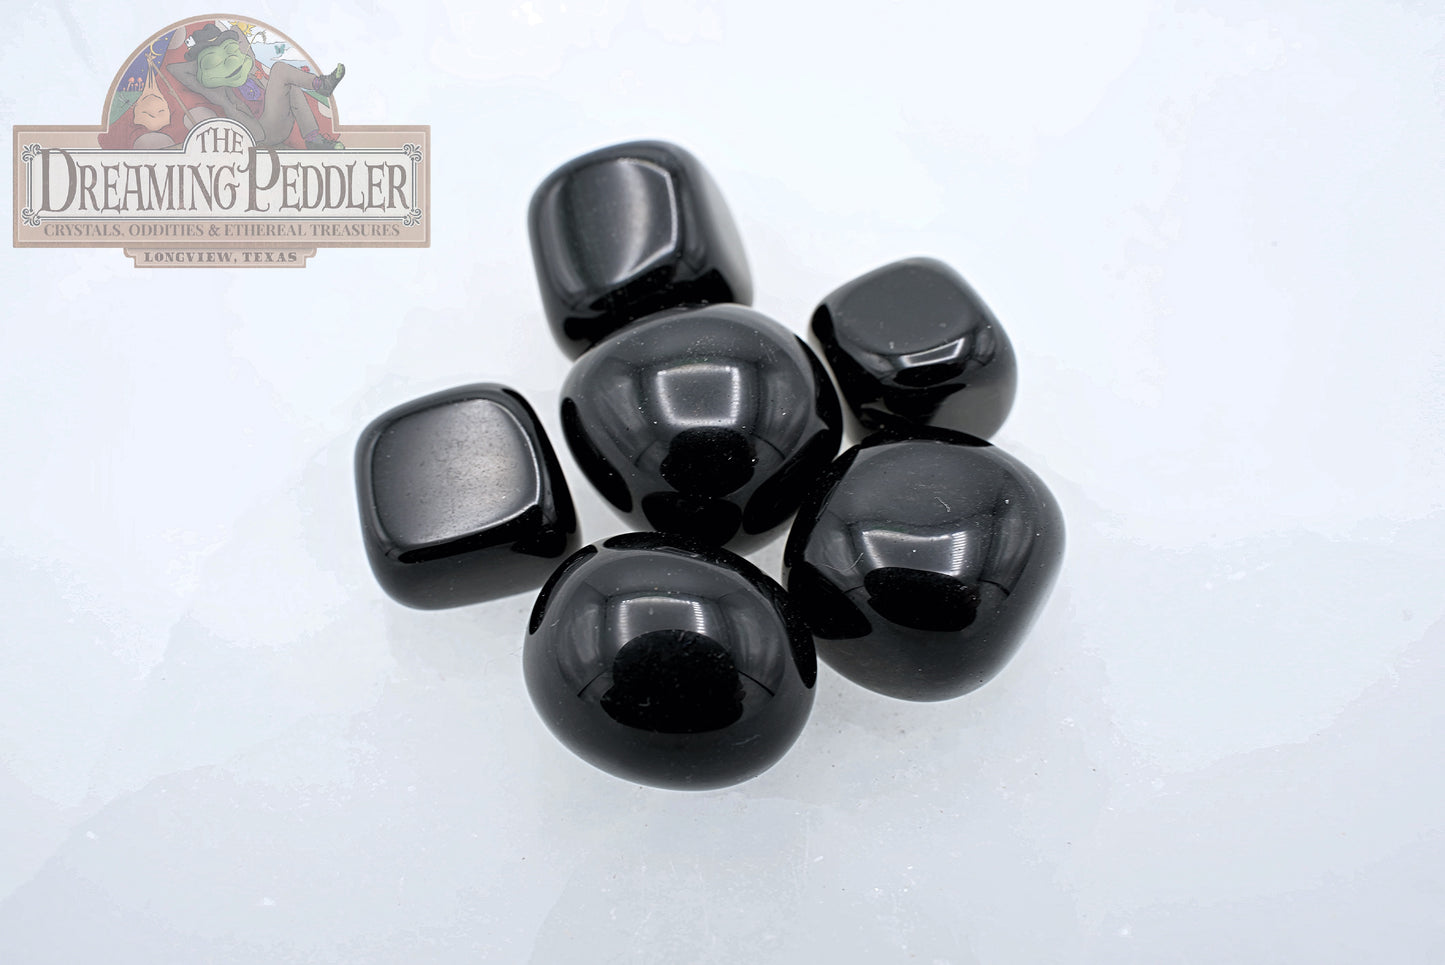 Natural, Hand-Selected Obsidian Tumbled Stone Individual Pieces